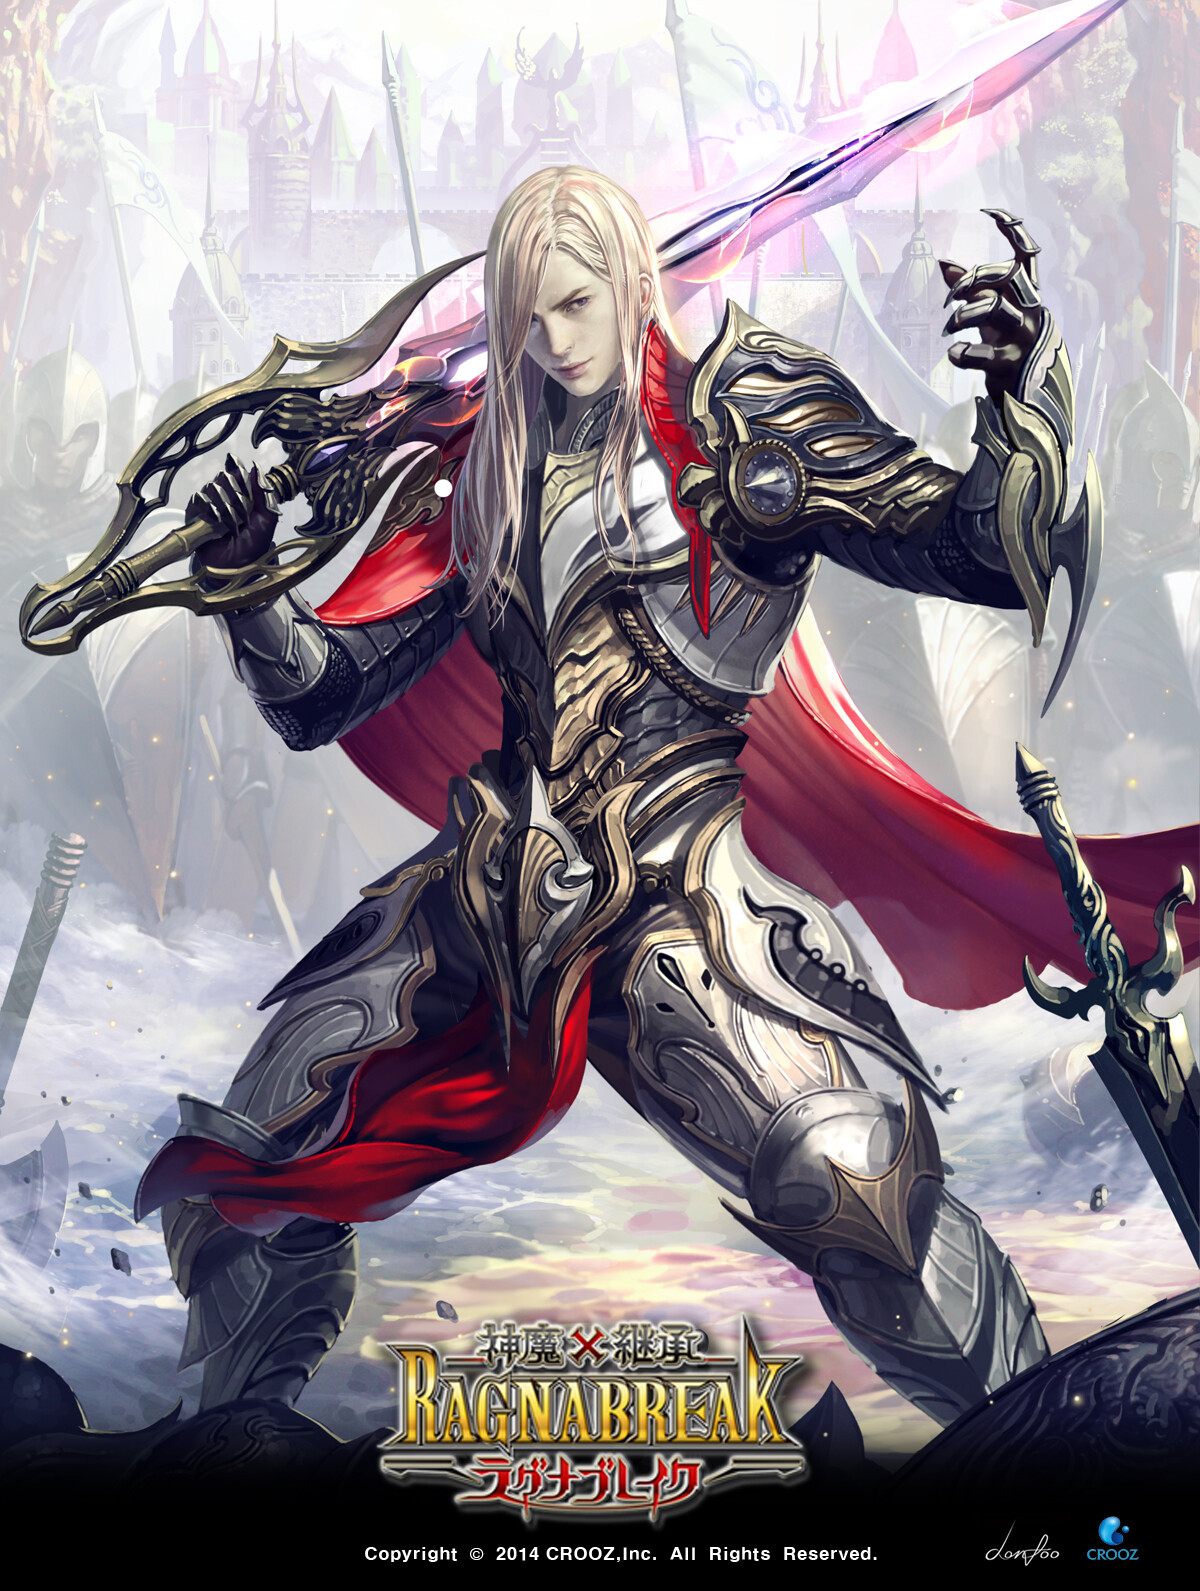 General 1200x1591 drawing men blonde long hair warrior armor steel cape red clothing weapon sword spell magic